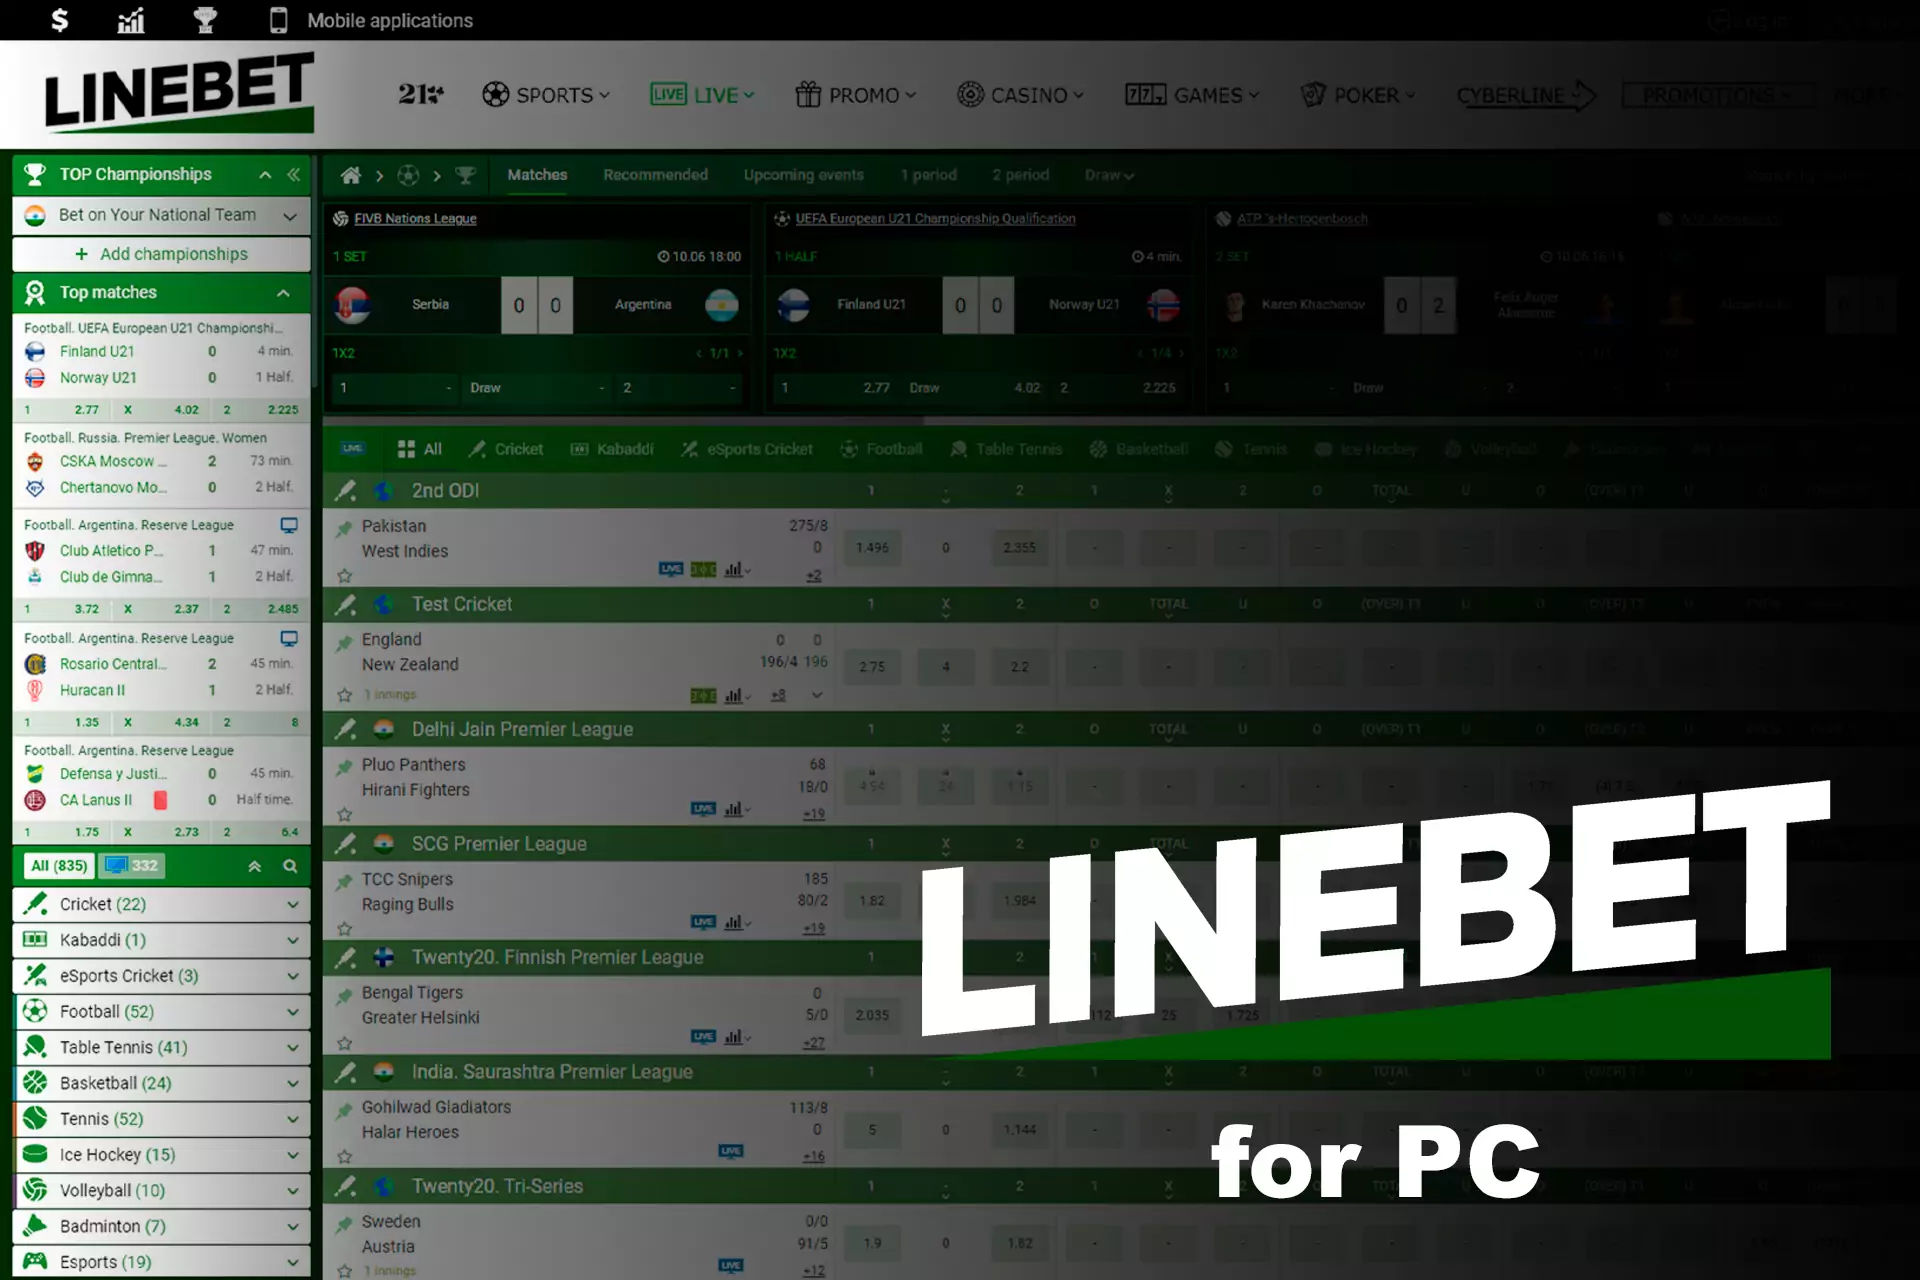 There is no special client of Linebet for PC yet.